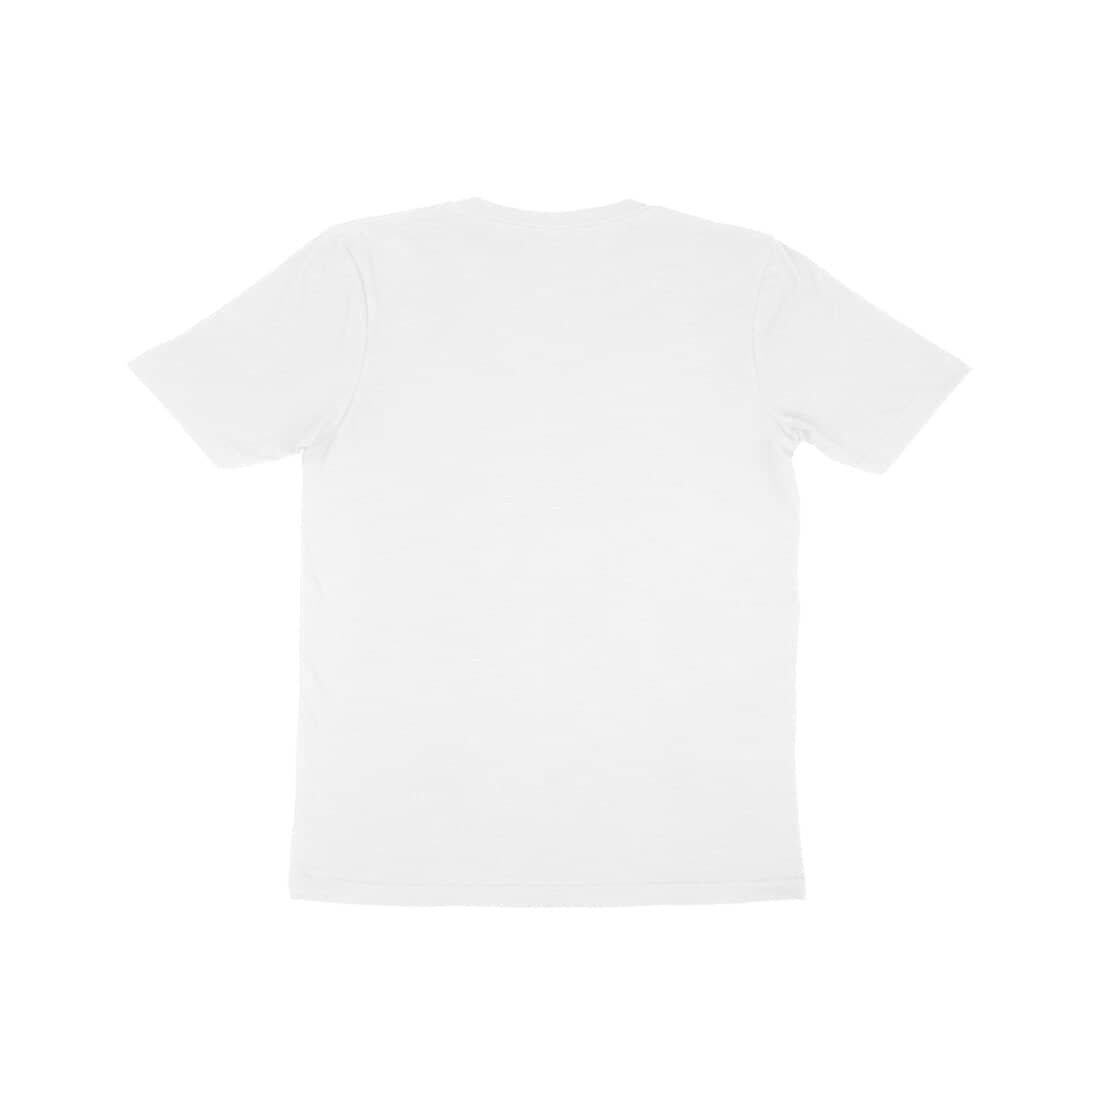 Happy 7th Birthday Special White T Shirt for Kids Printrove 